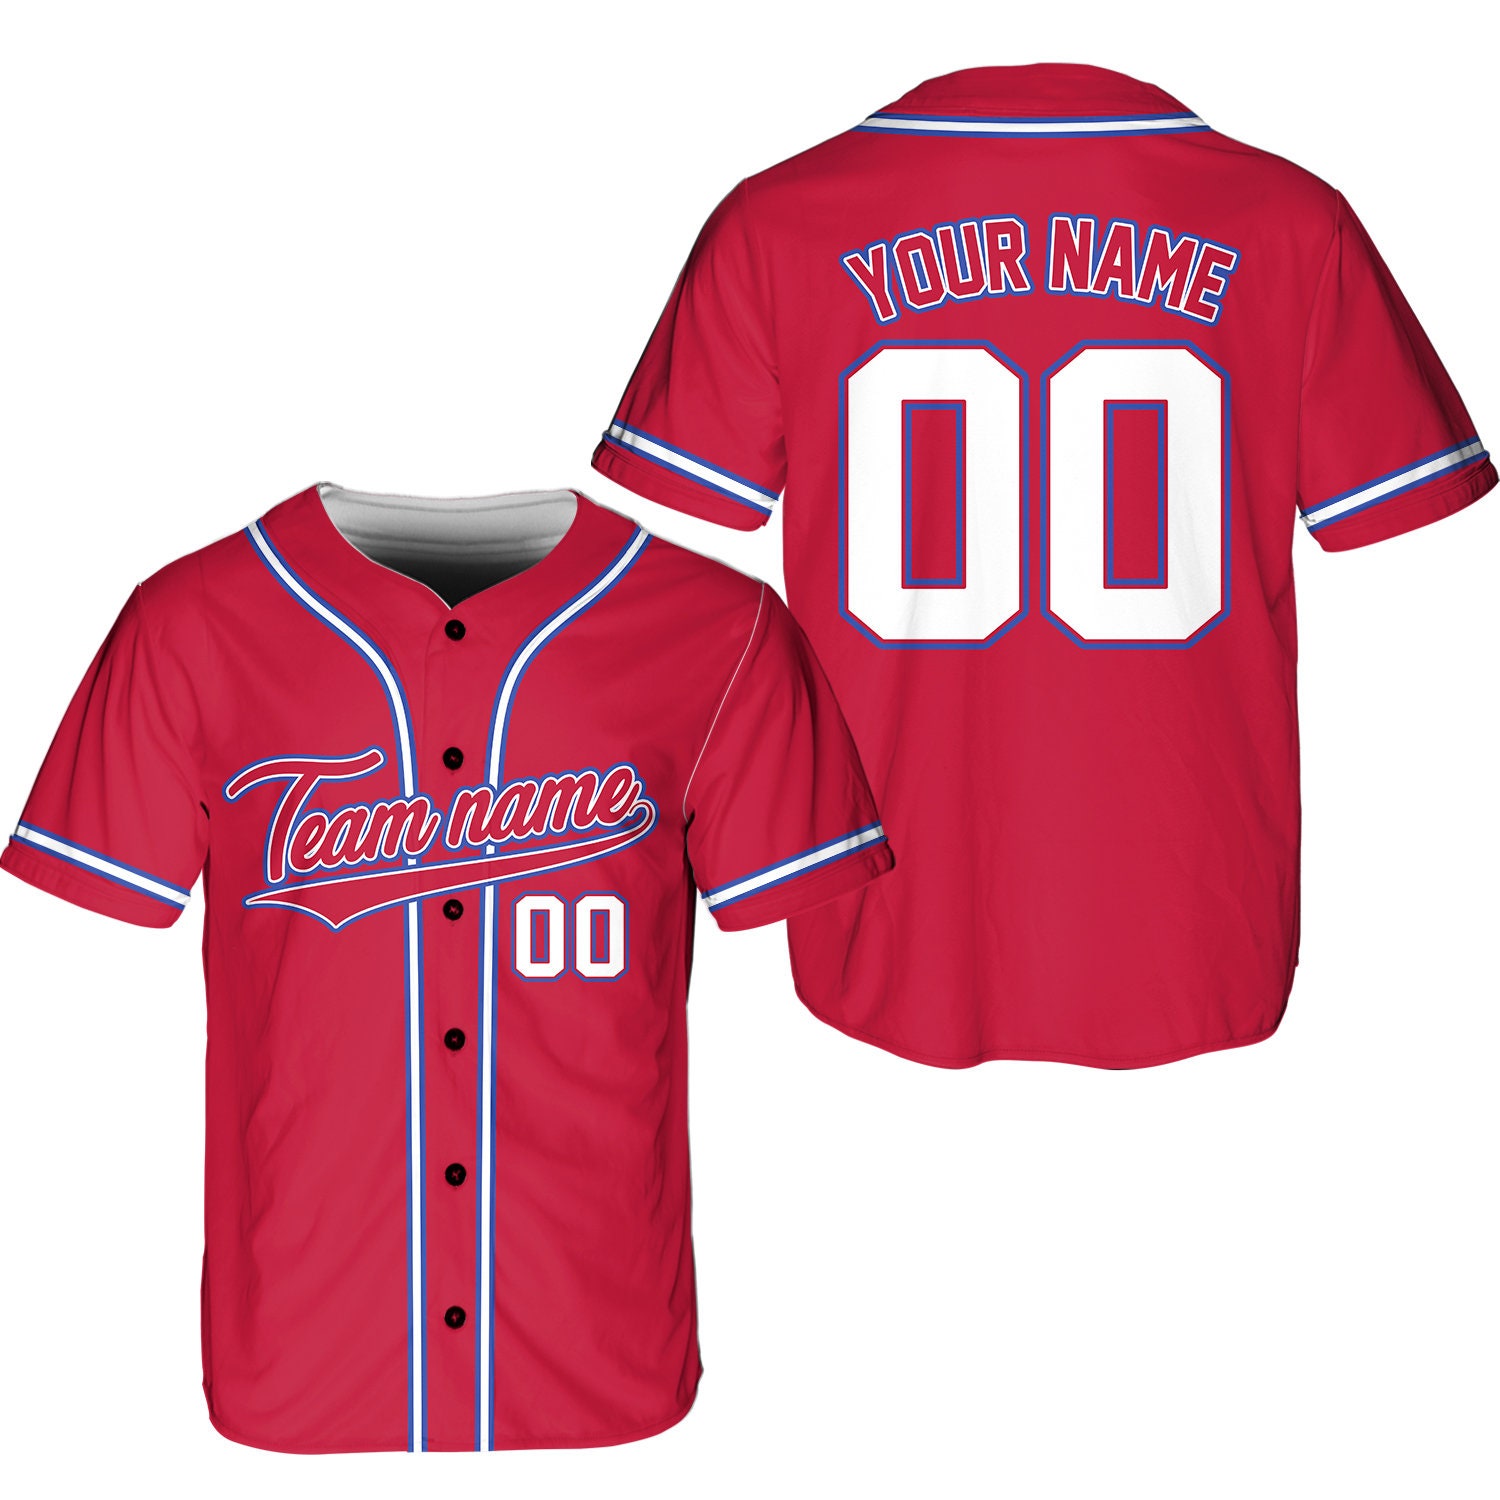  Custom Baseball Jersey Add Any Name and Number, Personalized  Jersry for Men Women and Children : Sports & Outdoors